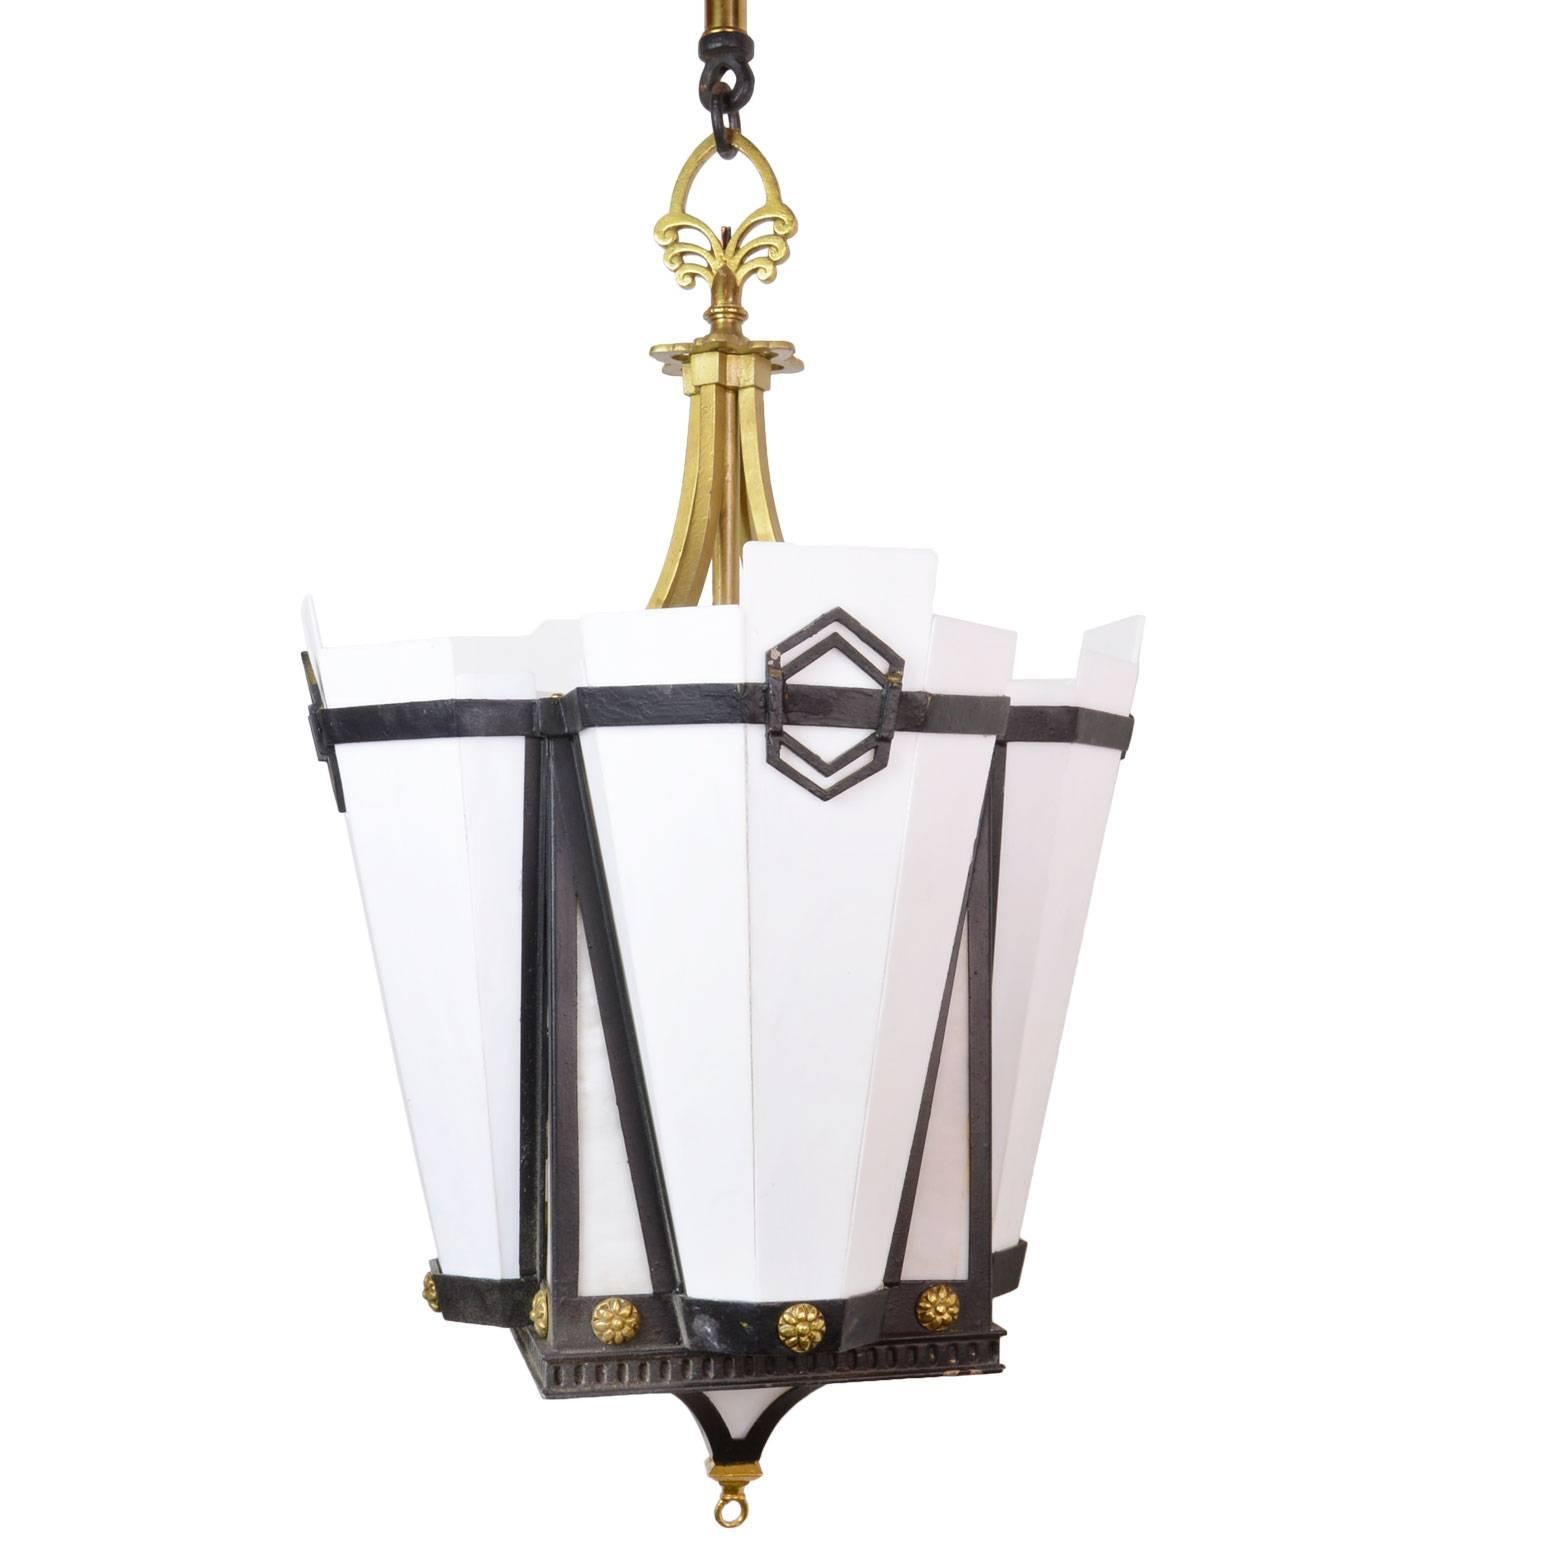 Made in the 1920s, these pendants are constructed from iron and brass and have interesting geometric milk glass panels. Other details include bent glass panels, an ornate chain, and geometric, Art Deco detailing throughout. Matching pair